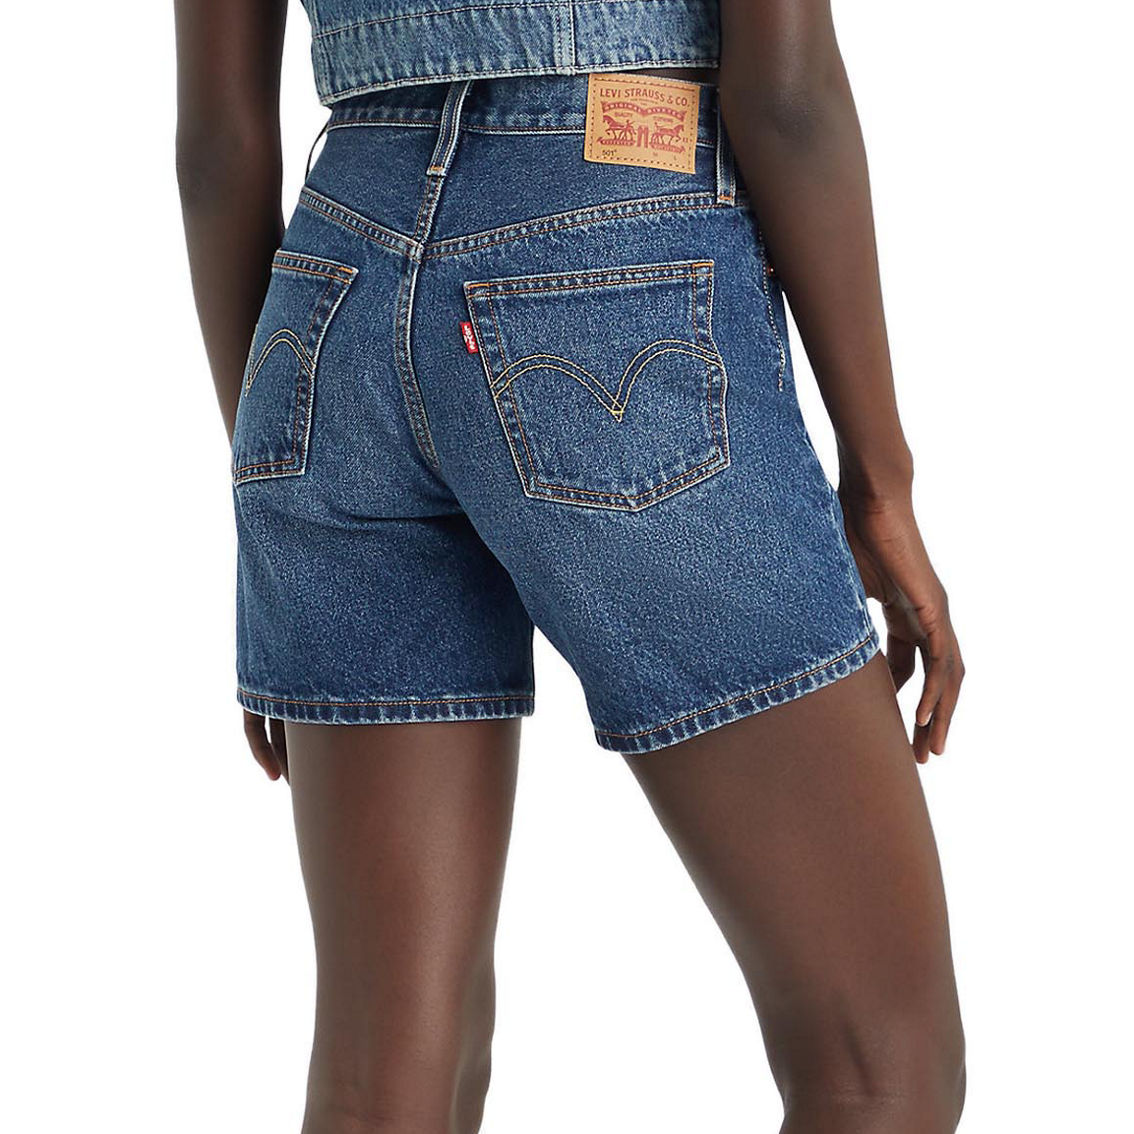 Levi's 501 Mid Thigh Shorts - Image 2 of 3